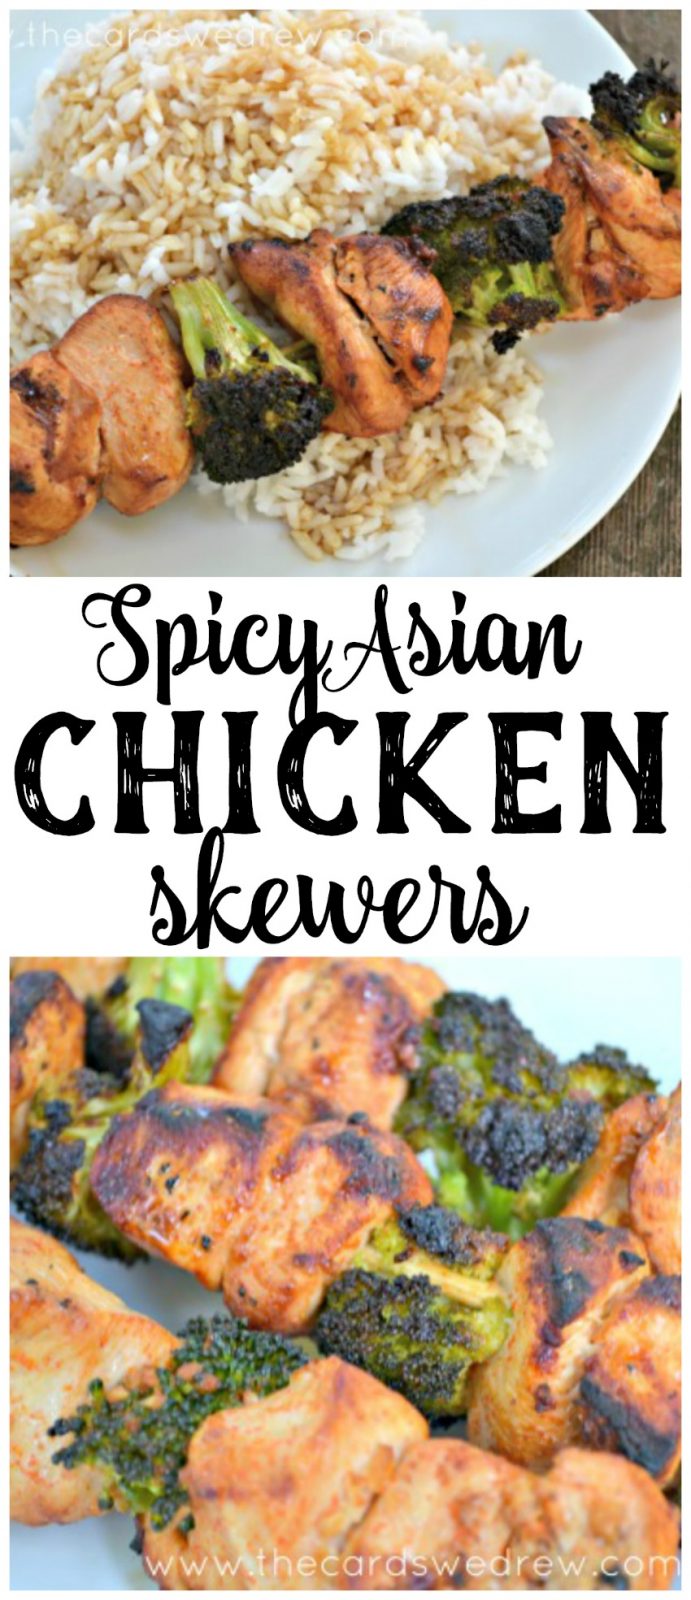 Spicy Asian Chicken Skewers with Broccoli 1